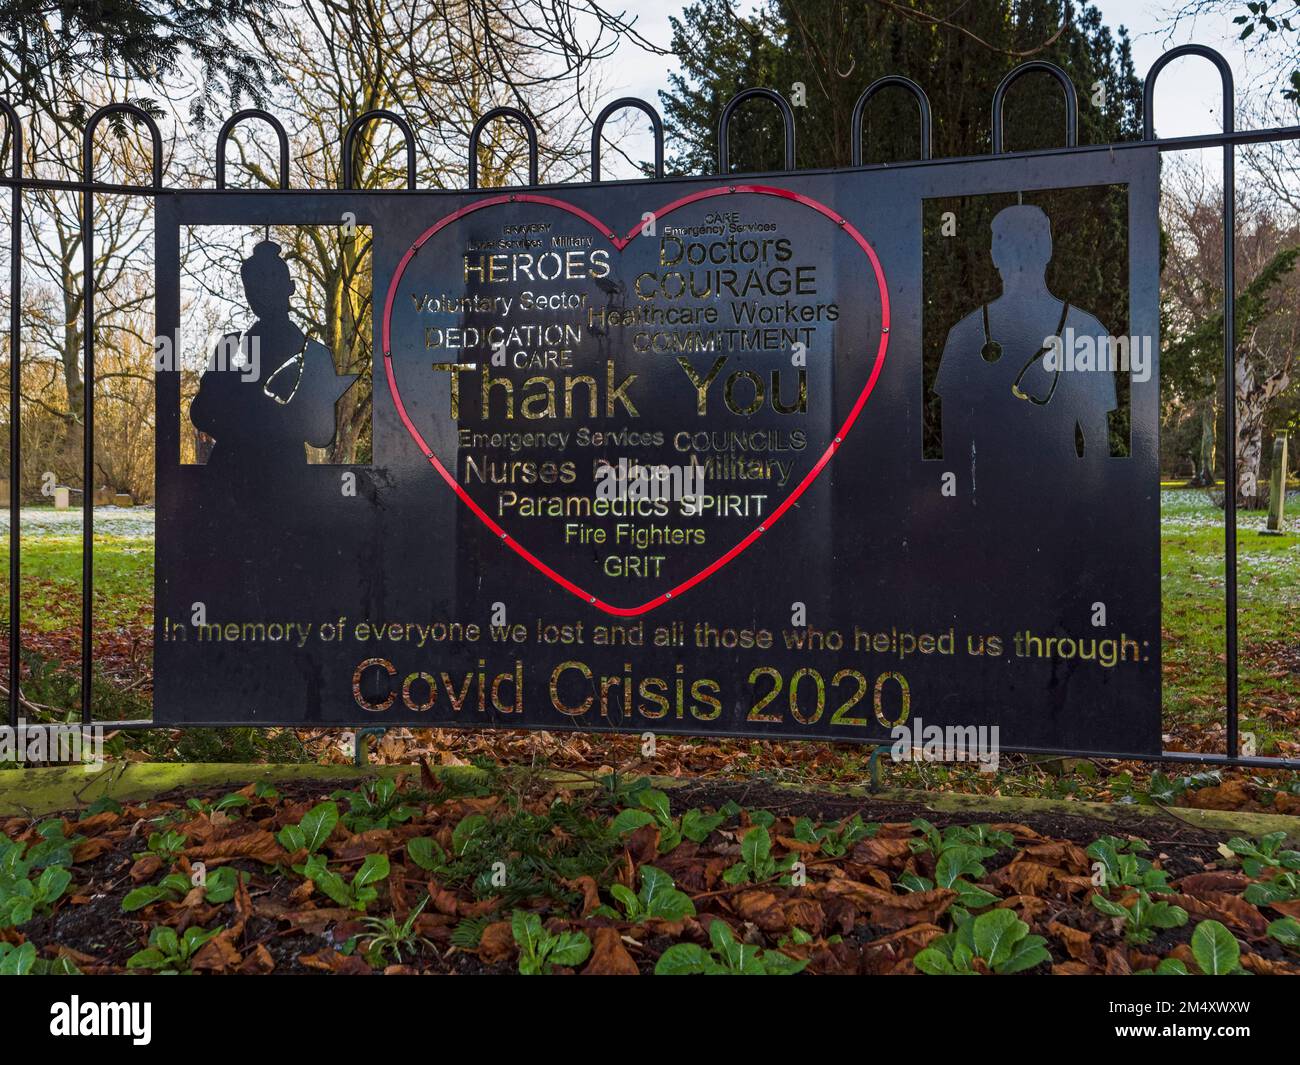 Memorial sign at UK cemetery for those who perished and worked through the coronavirus pandemic. Stock Photo